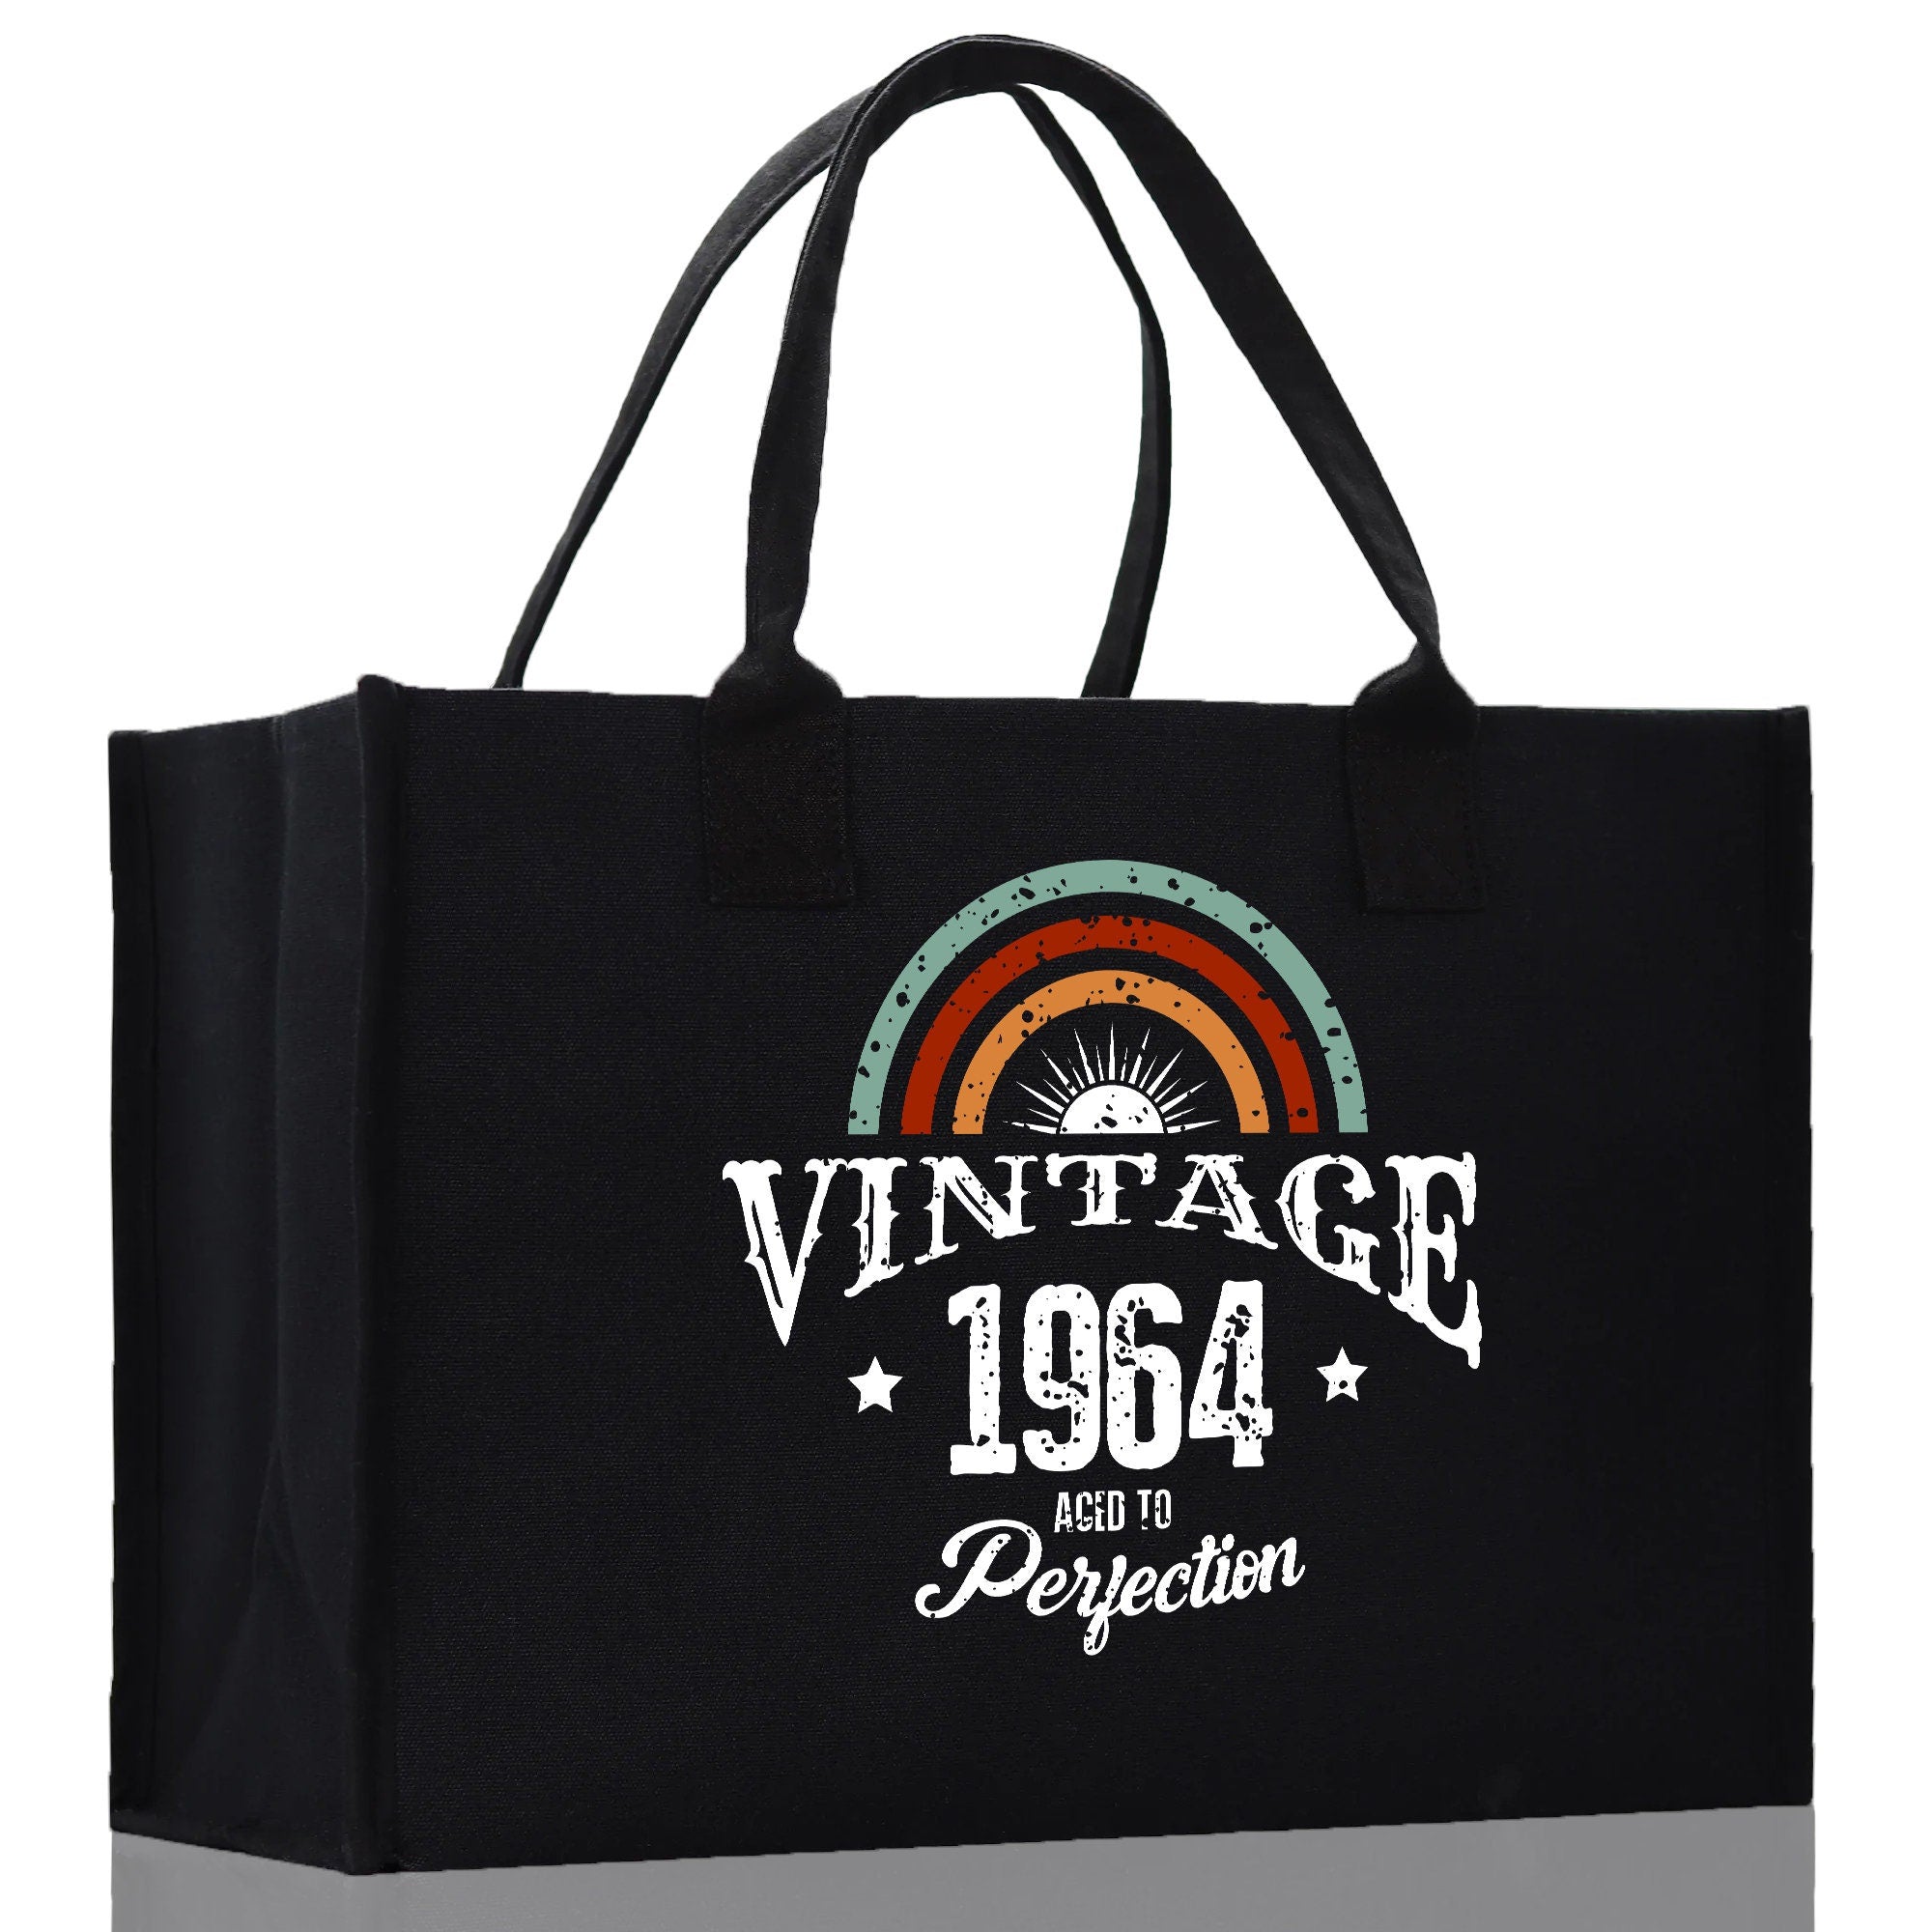 a black shopping bag with a vintage logo on it